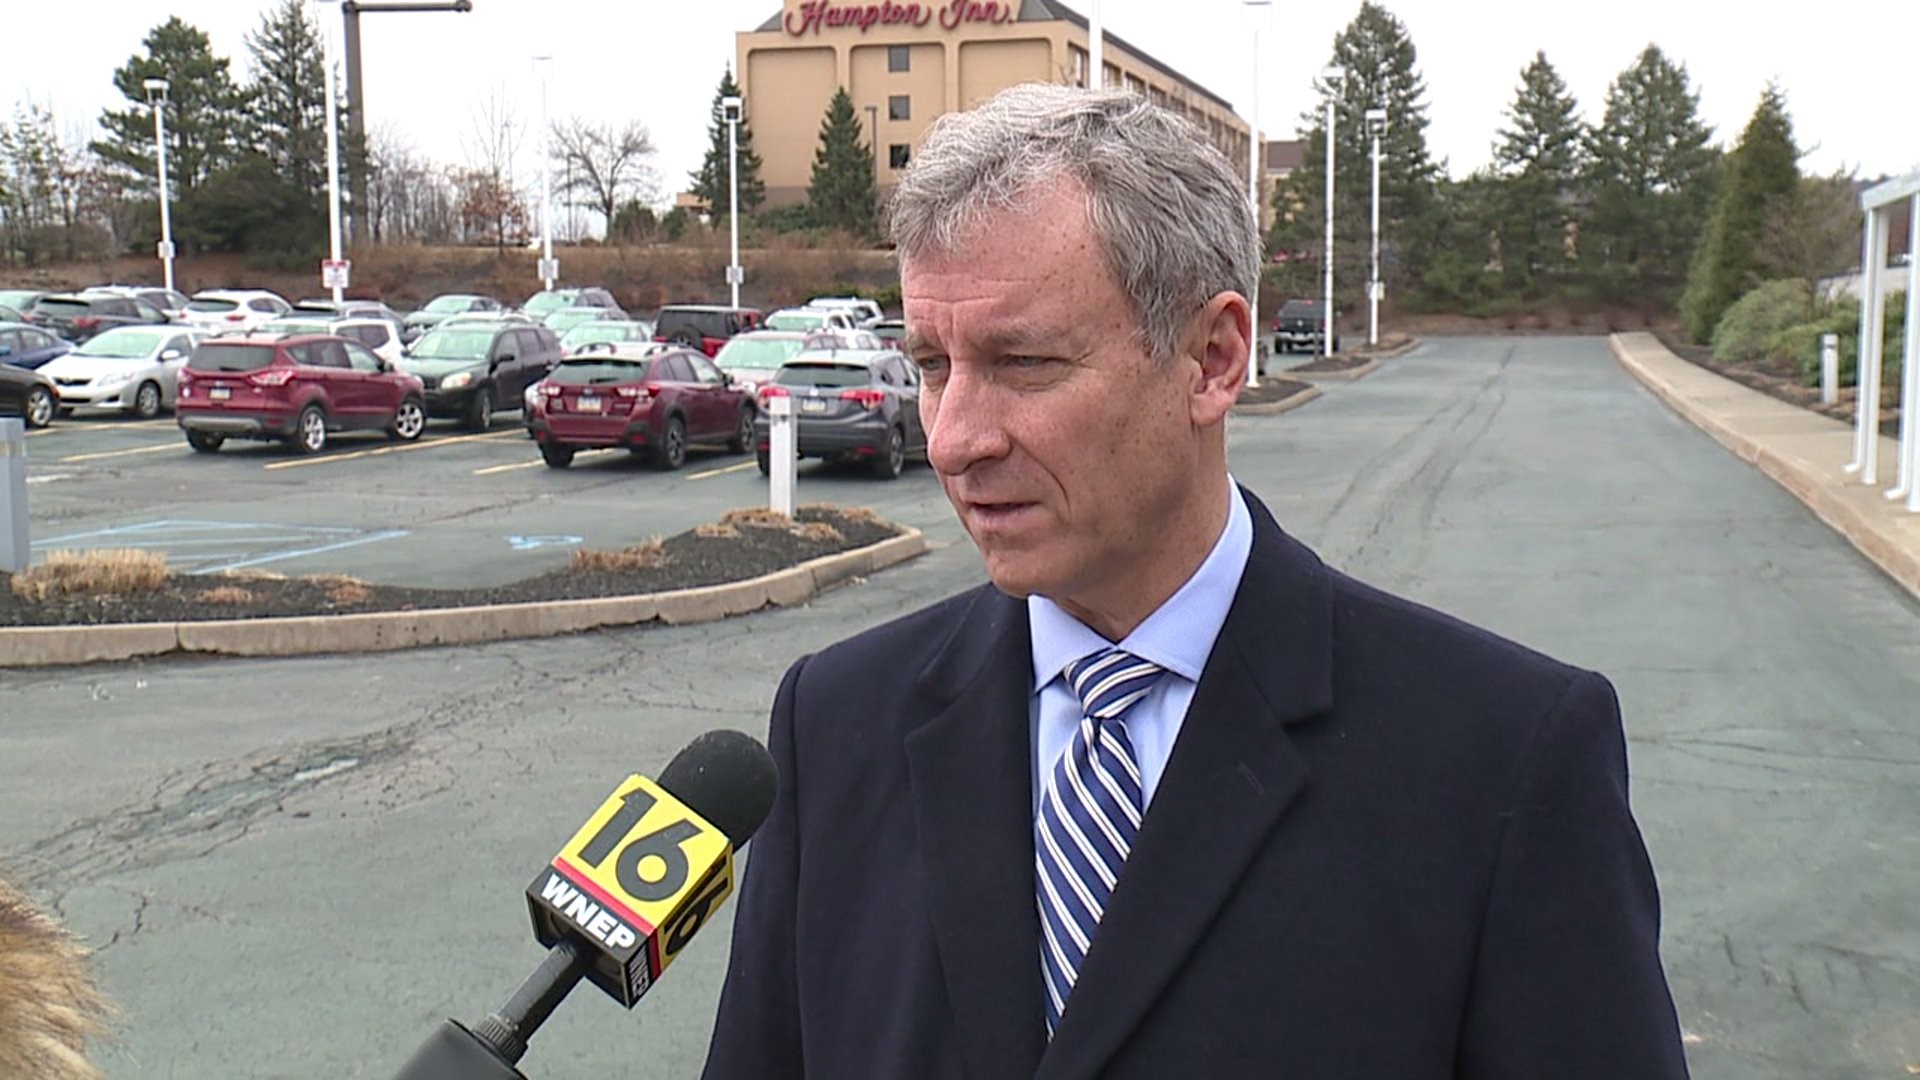 Congressman Cartwright tested positive for COVID-19 on Saturday afternoon.